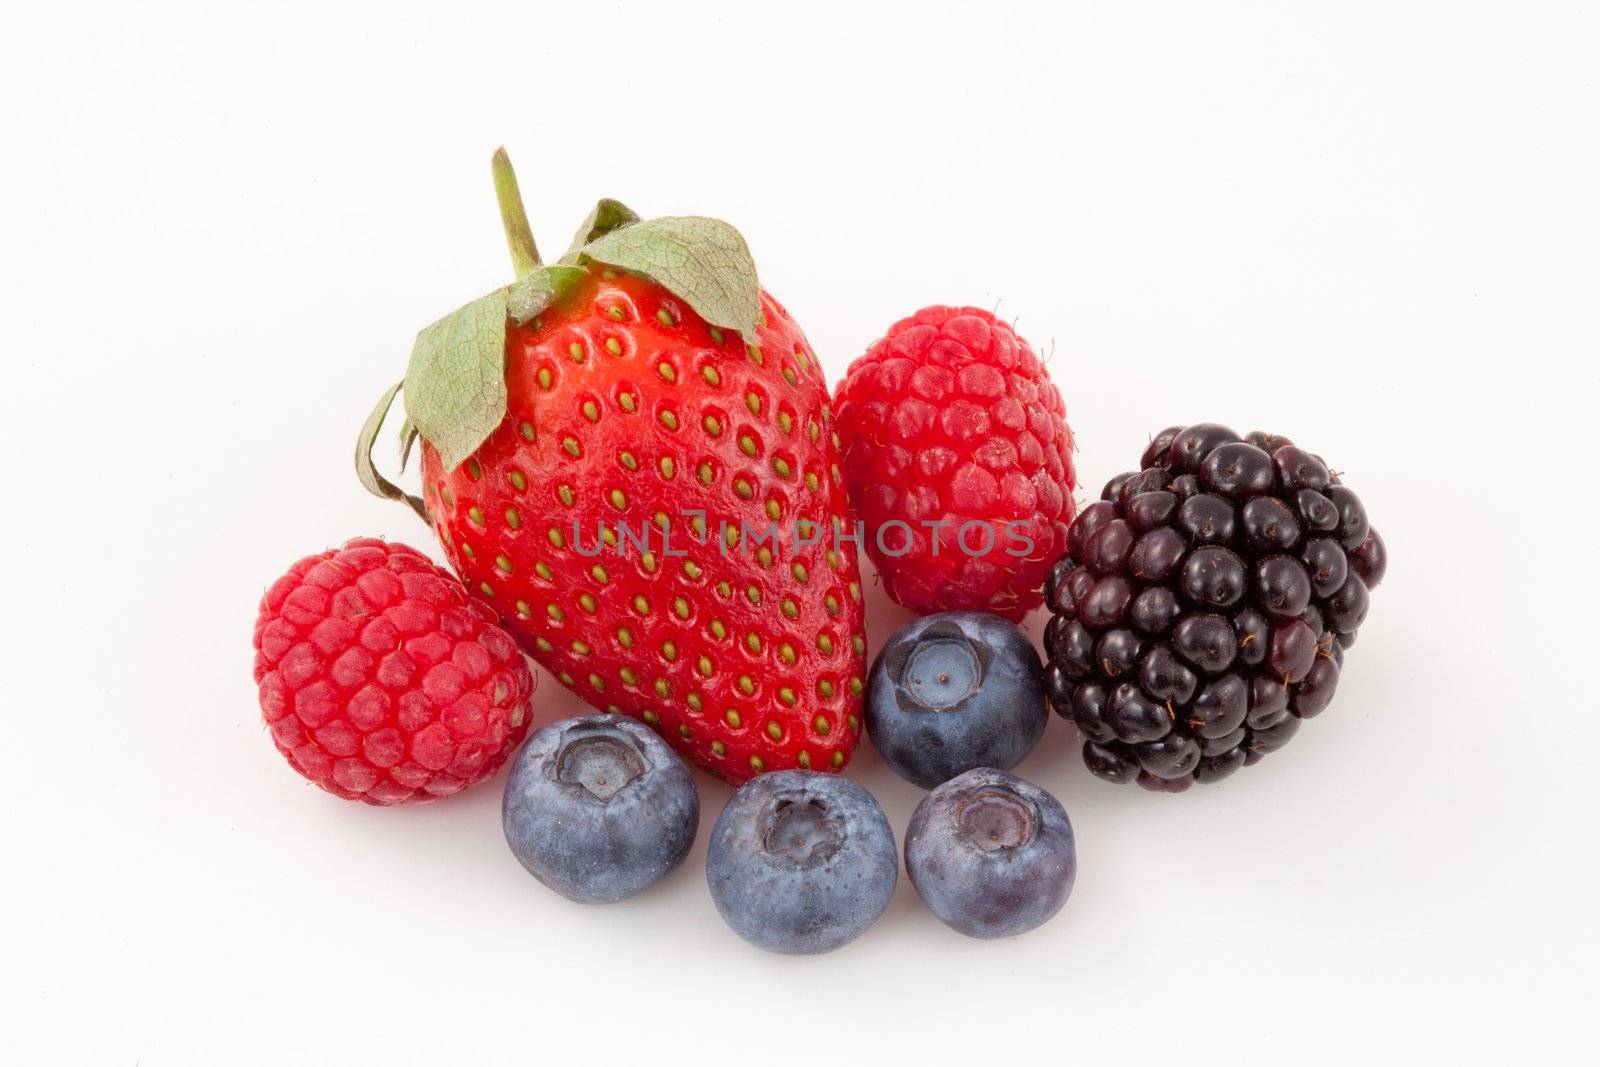 Fruits laid out together against a white background